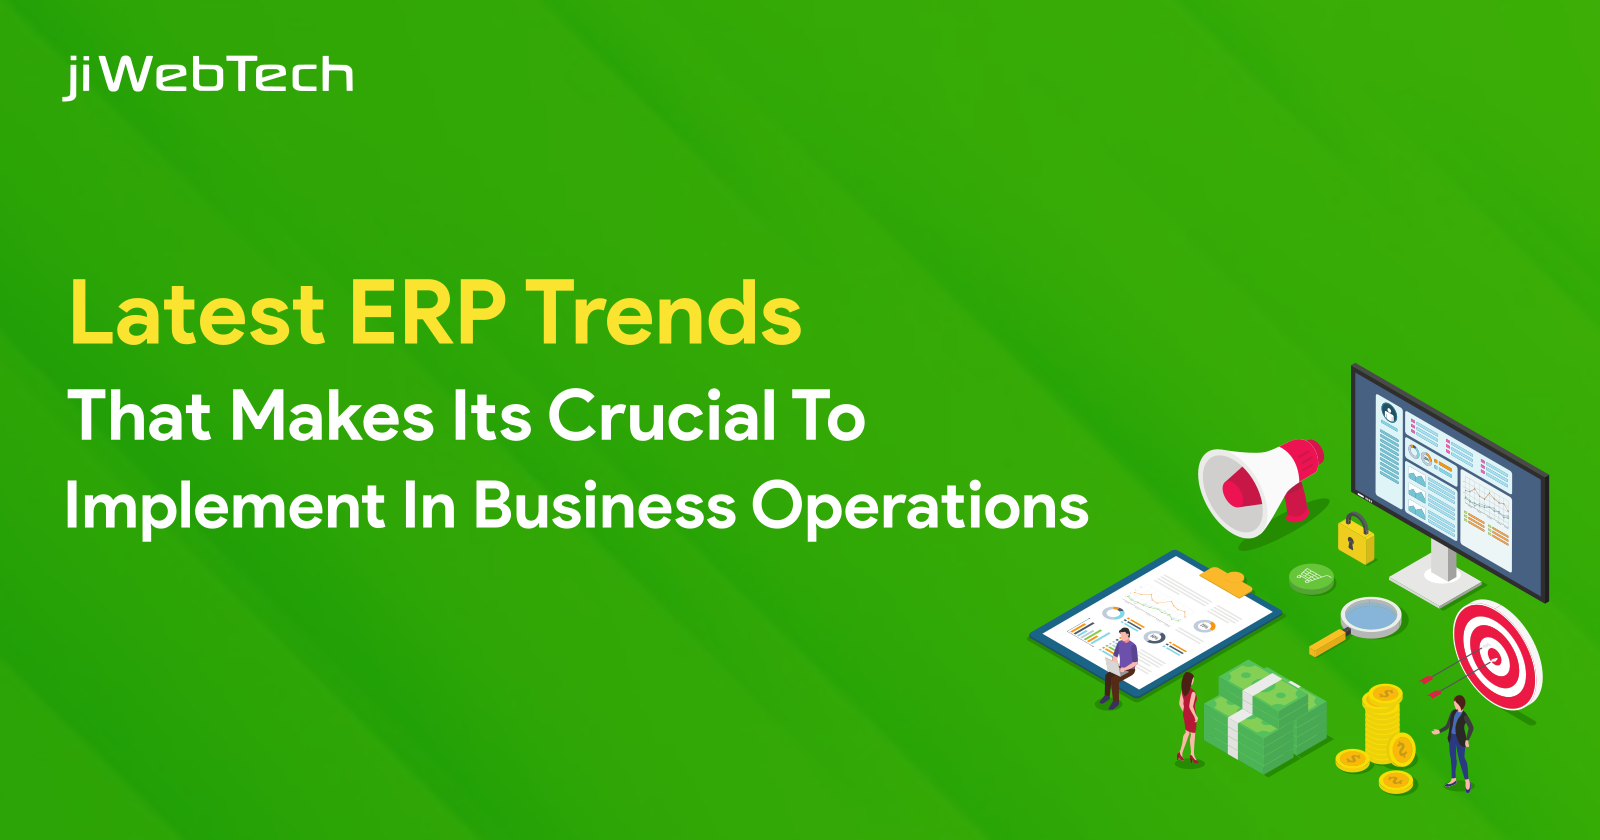 Latest ERP Trends That Makes Its Crucial To Implement In Business Operations